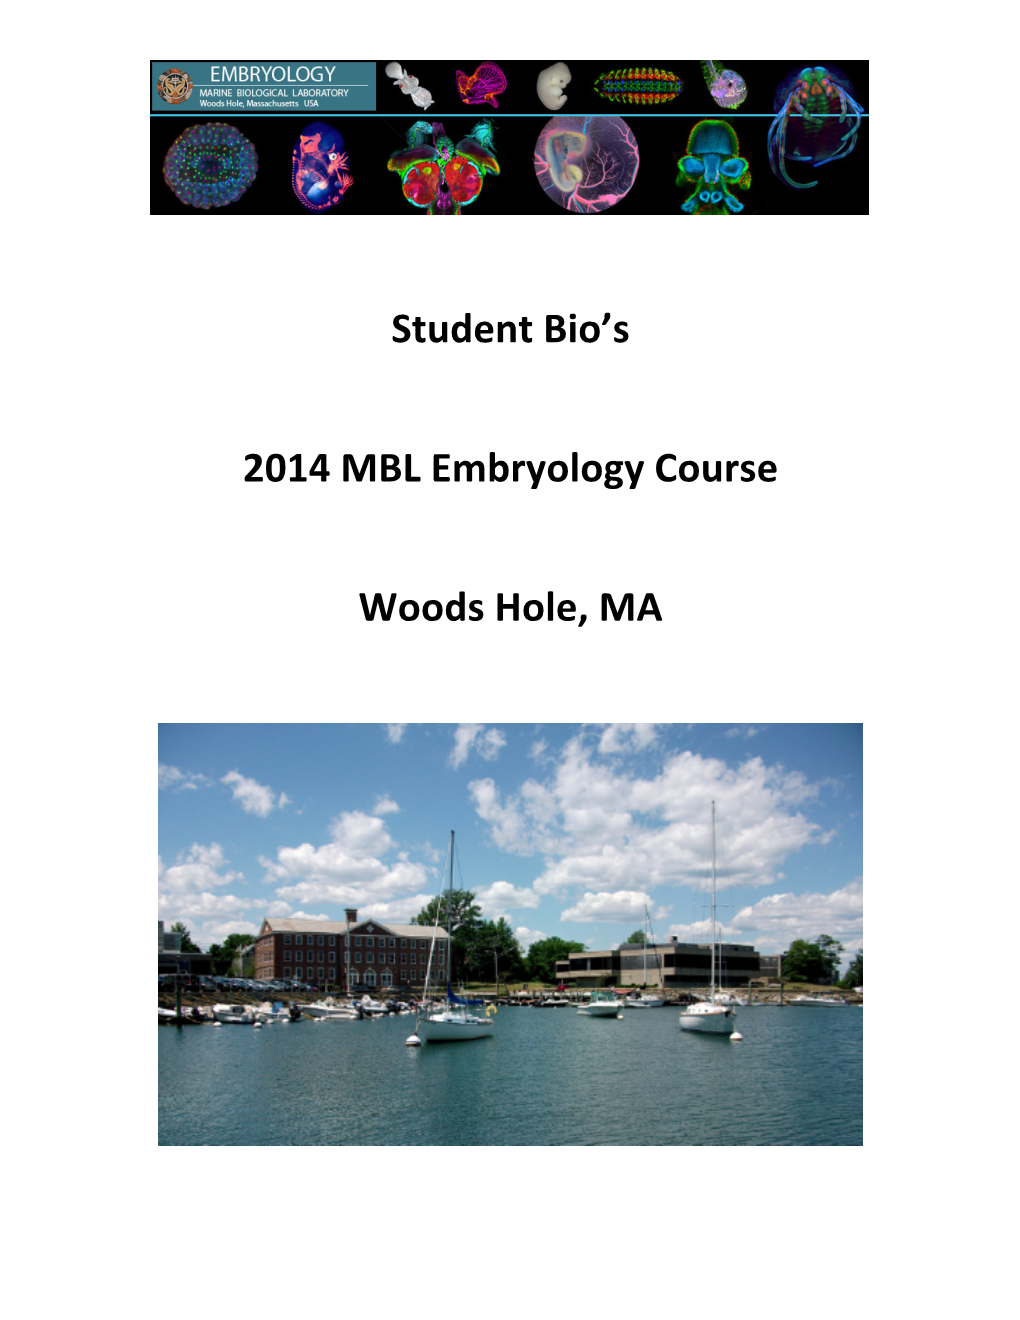 Student Bio's 2014 MBL Embryology Course Woods Hole, MA